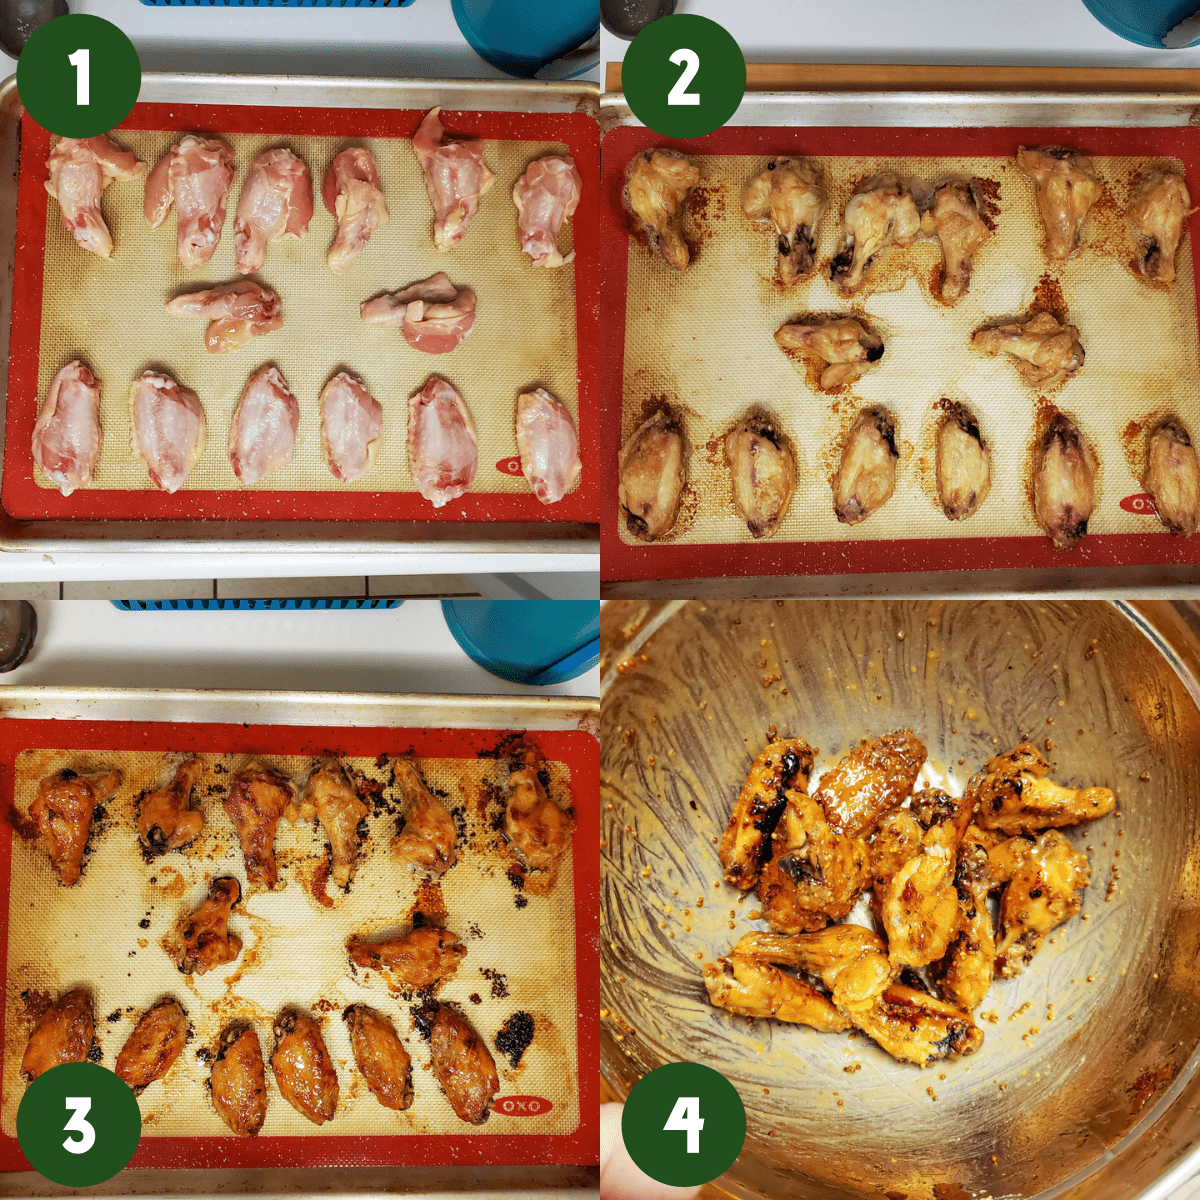 Photo collage of 2 by 2 photos showing steps of the recipe. Step 1) Raw chicken wings on a silicone mat in a single layer. Step 2) Cooked chicken wings on a silicone mat in a single layer. Step 3) Caramelized chicken wings in a single layer on a silicone mat. Step 4) Cooked wings tossed in a metal mixing bowl with mustard sauces.